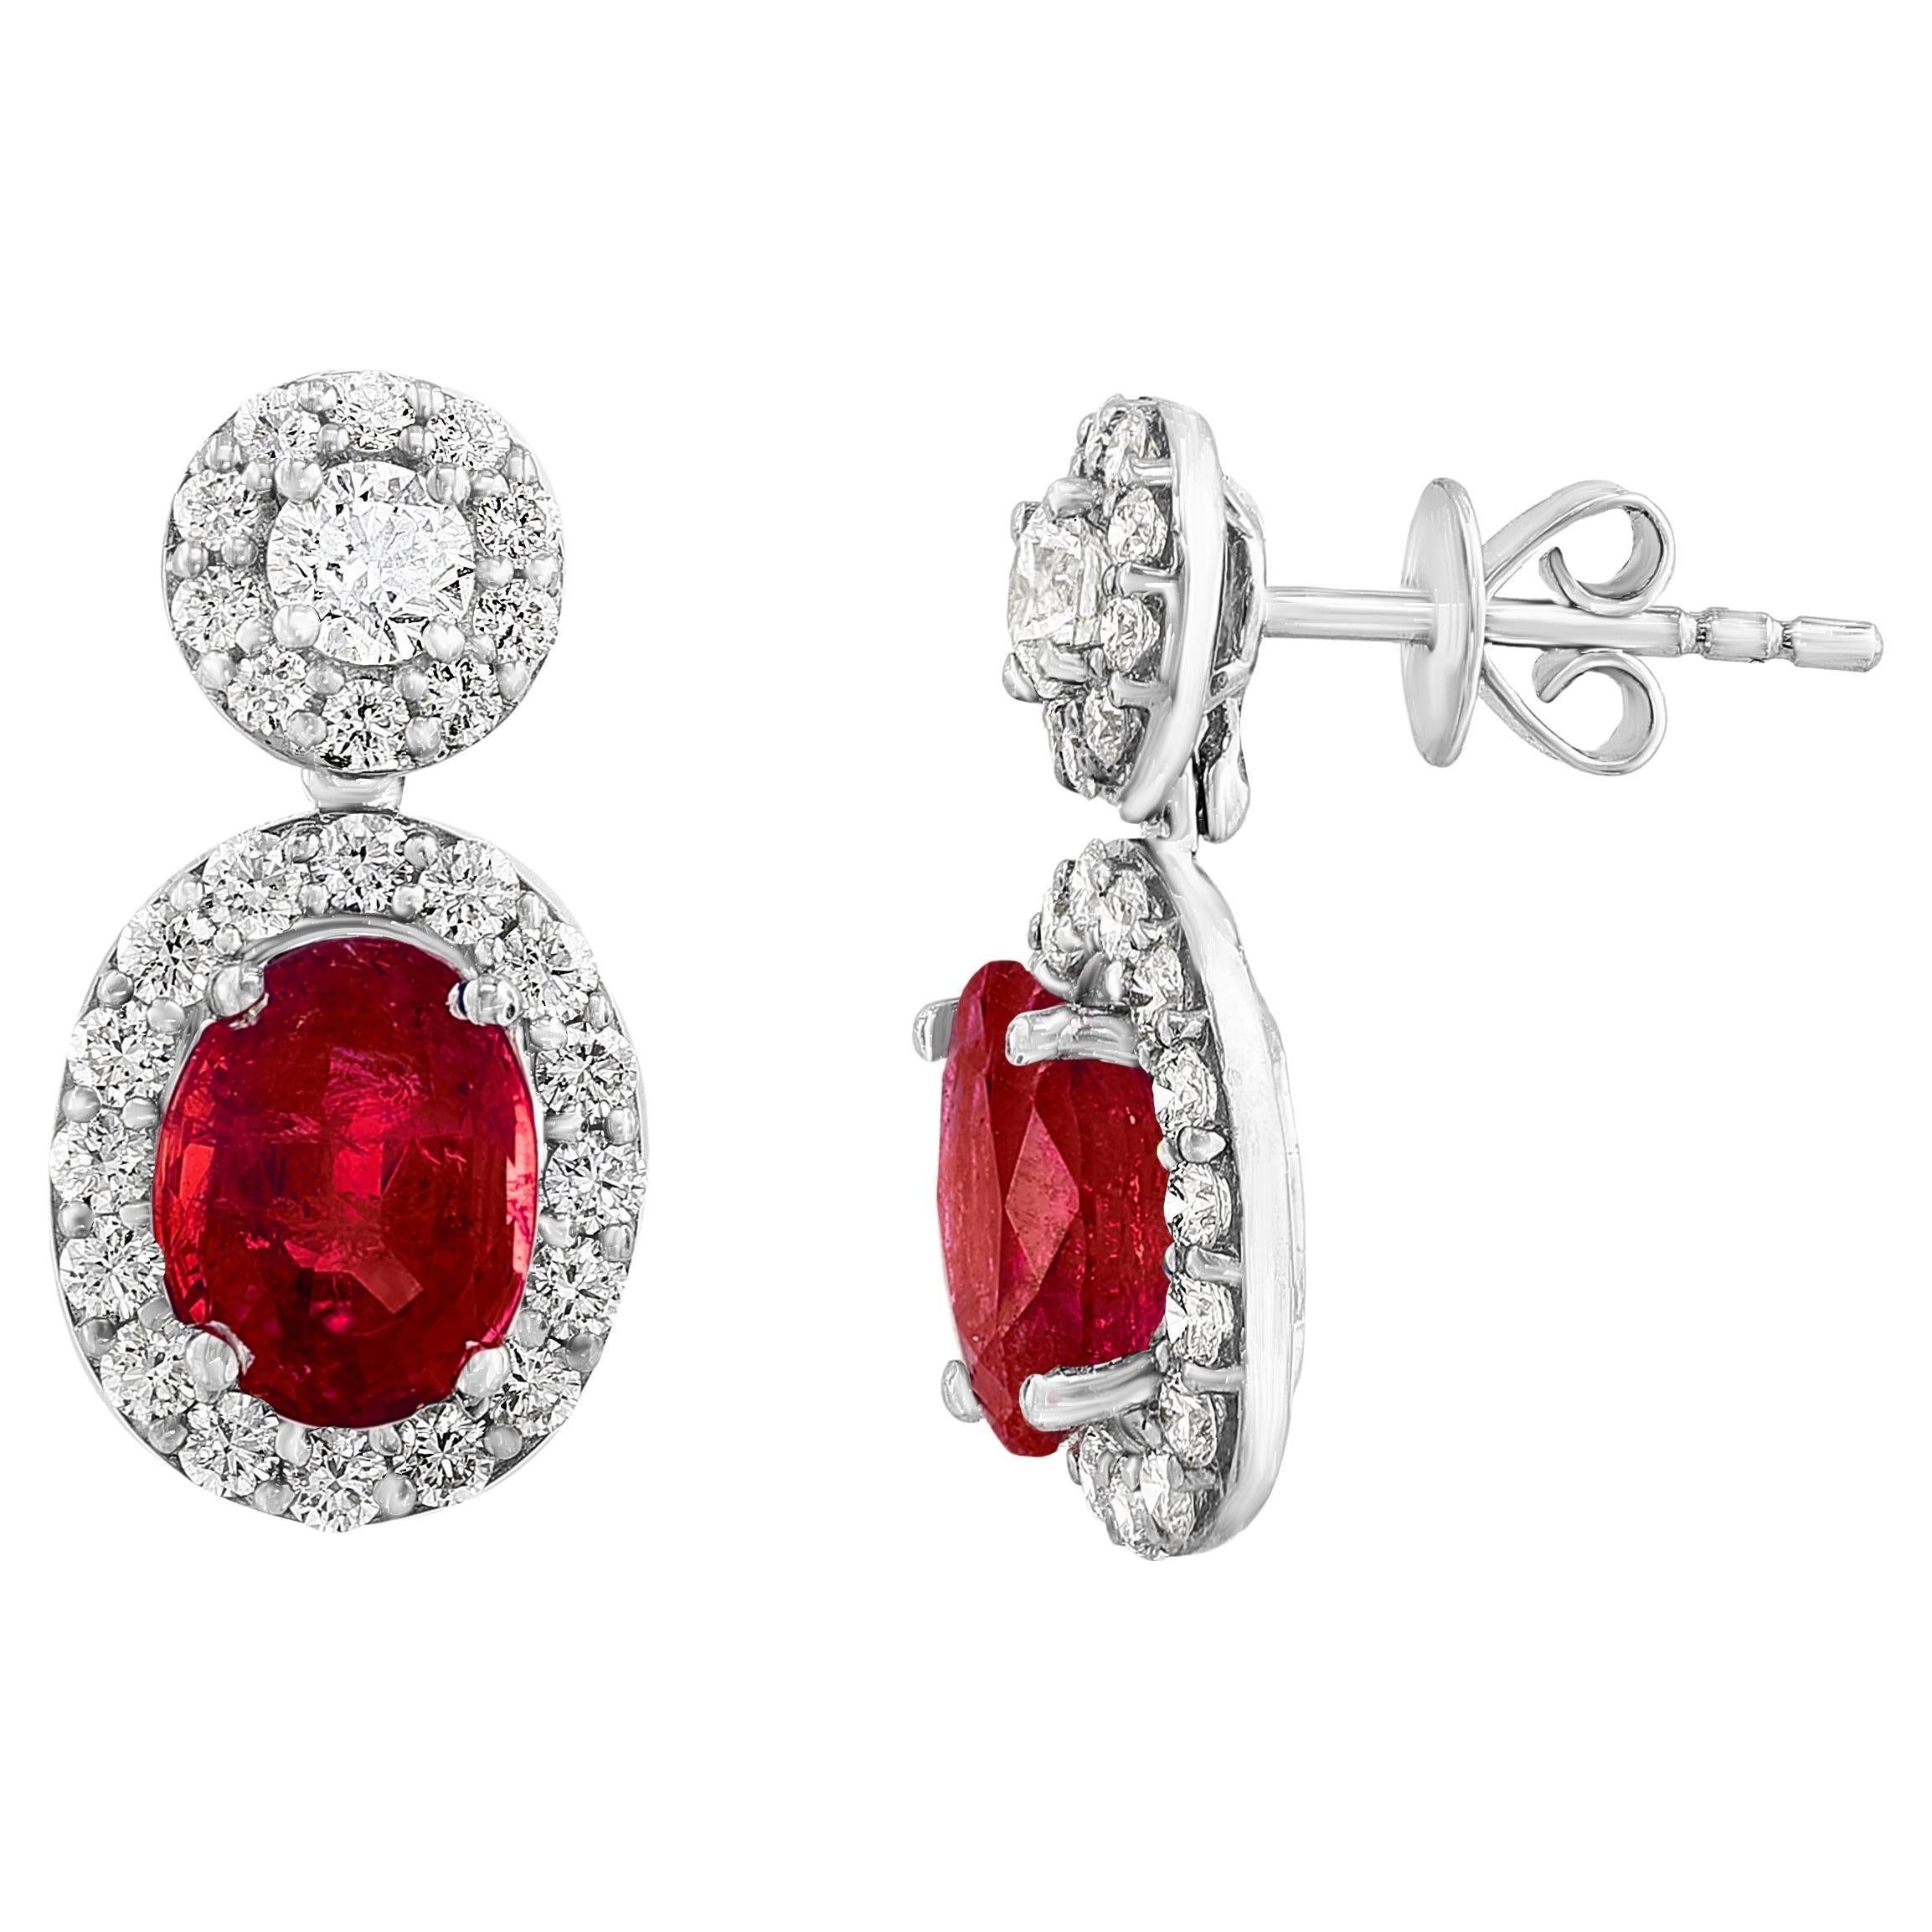 2.32 Carat of Oval cut Rubies and Diamond Drop Earrings in 18K White Gold